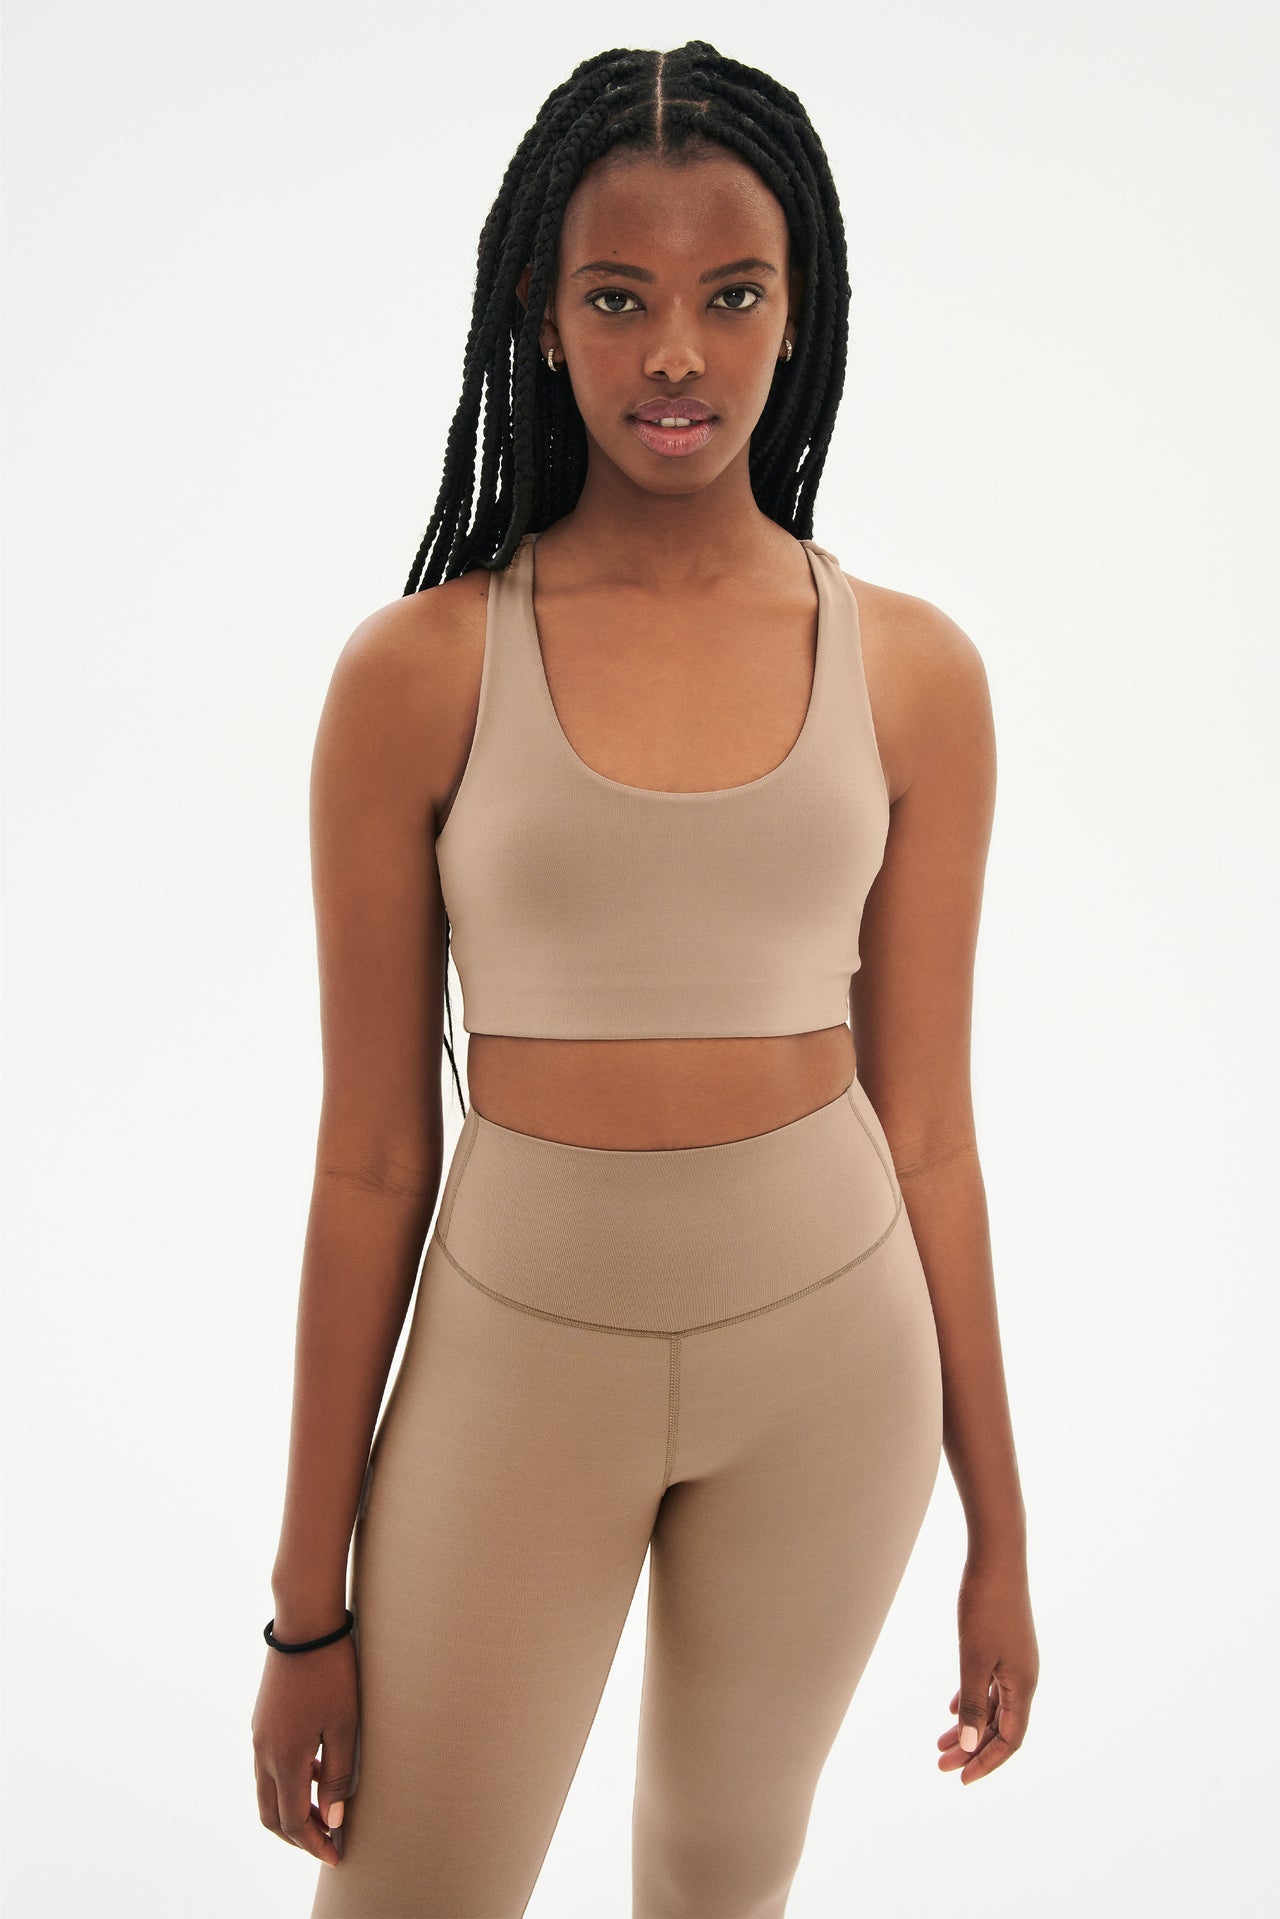 Front view of woman with black braids wearing light brown leggings and light brown bra